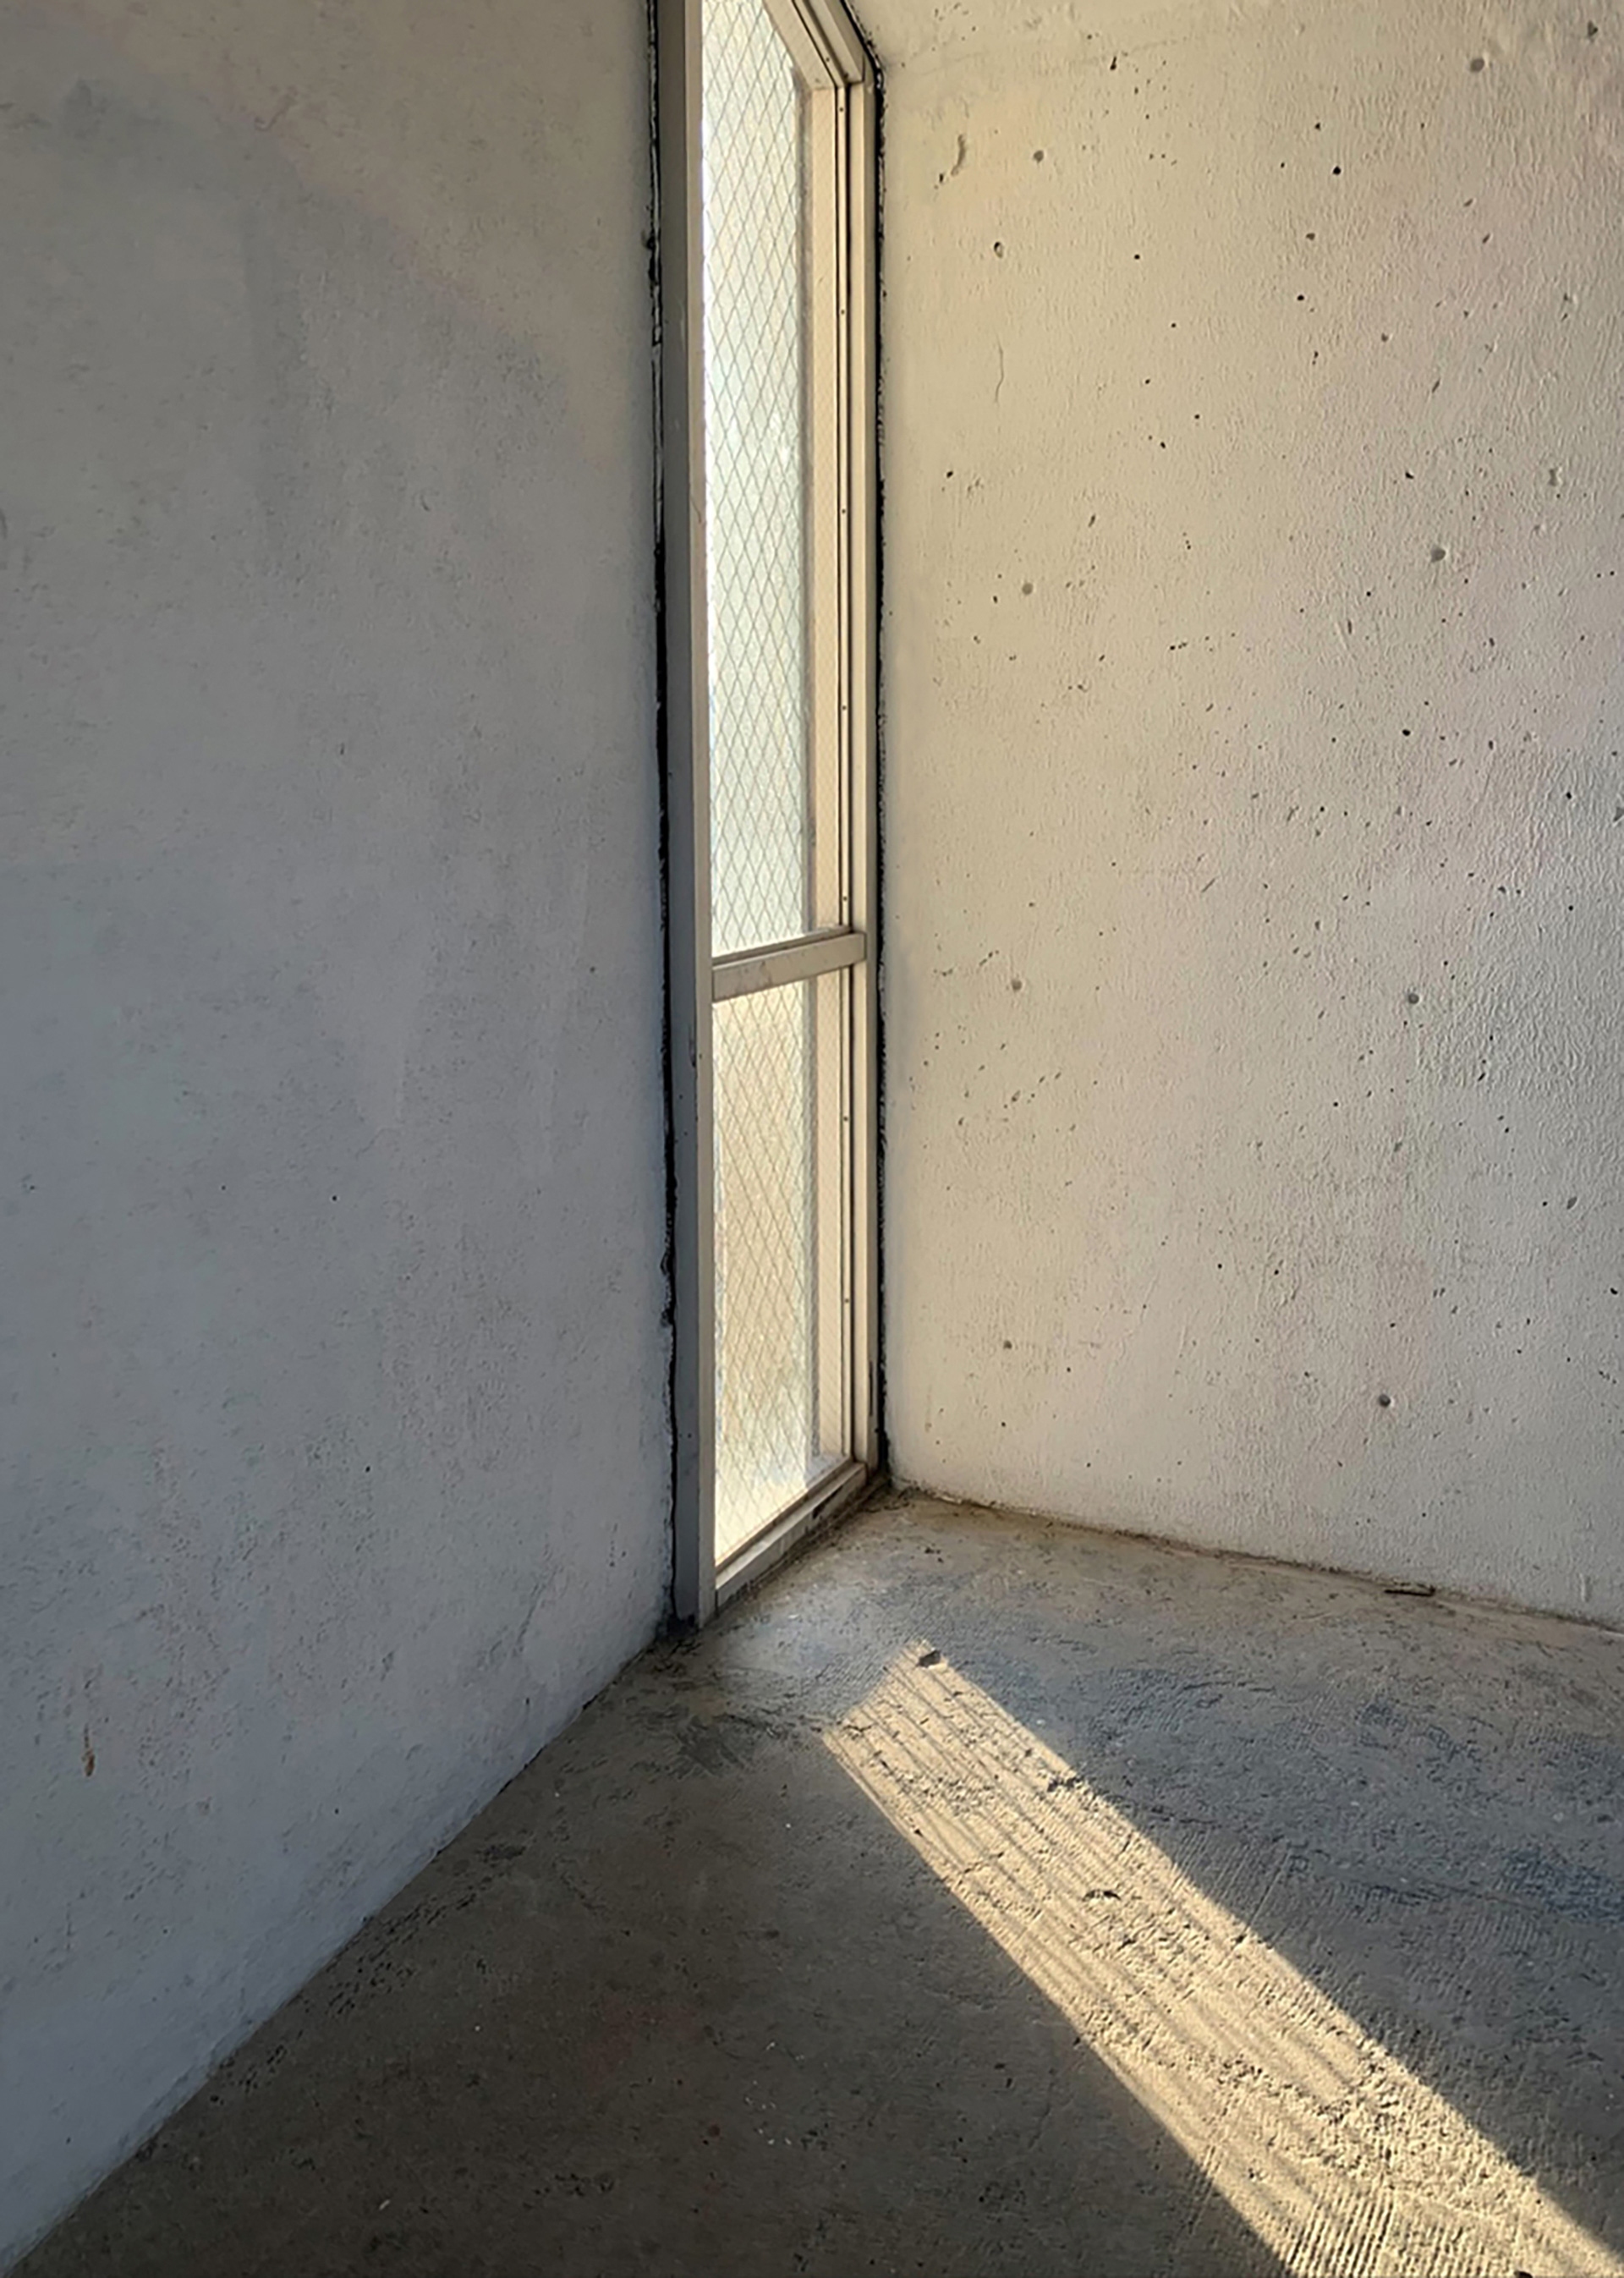 Photo of a window with a strong cast shadow on the floor